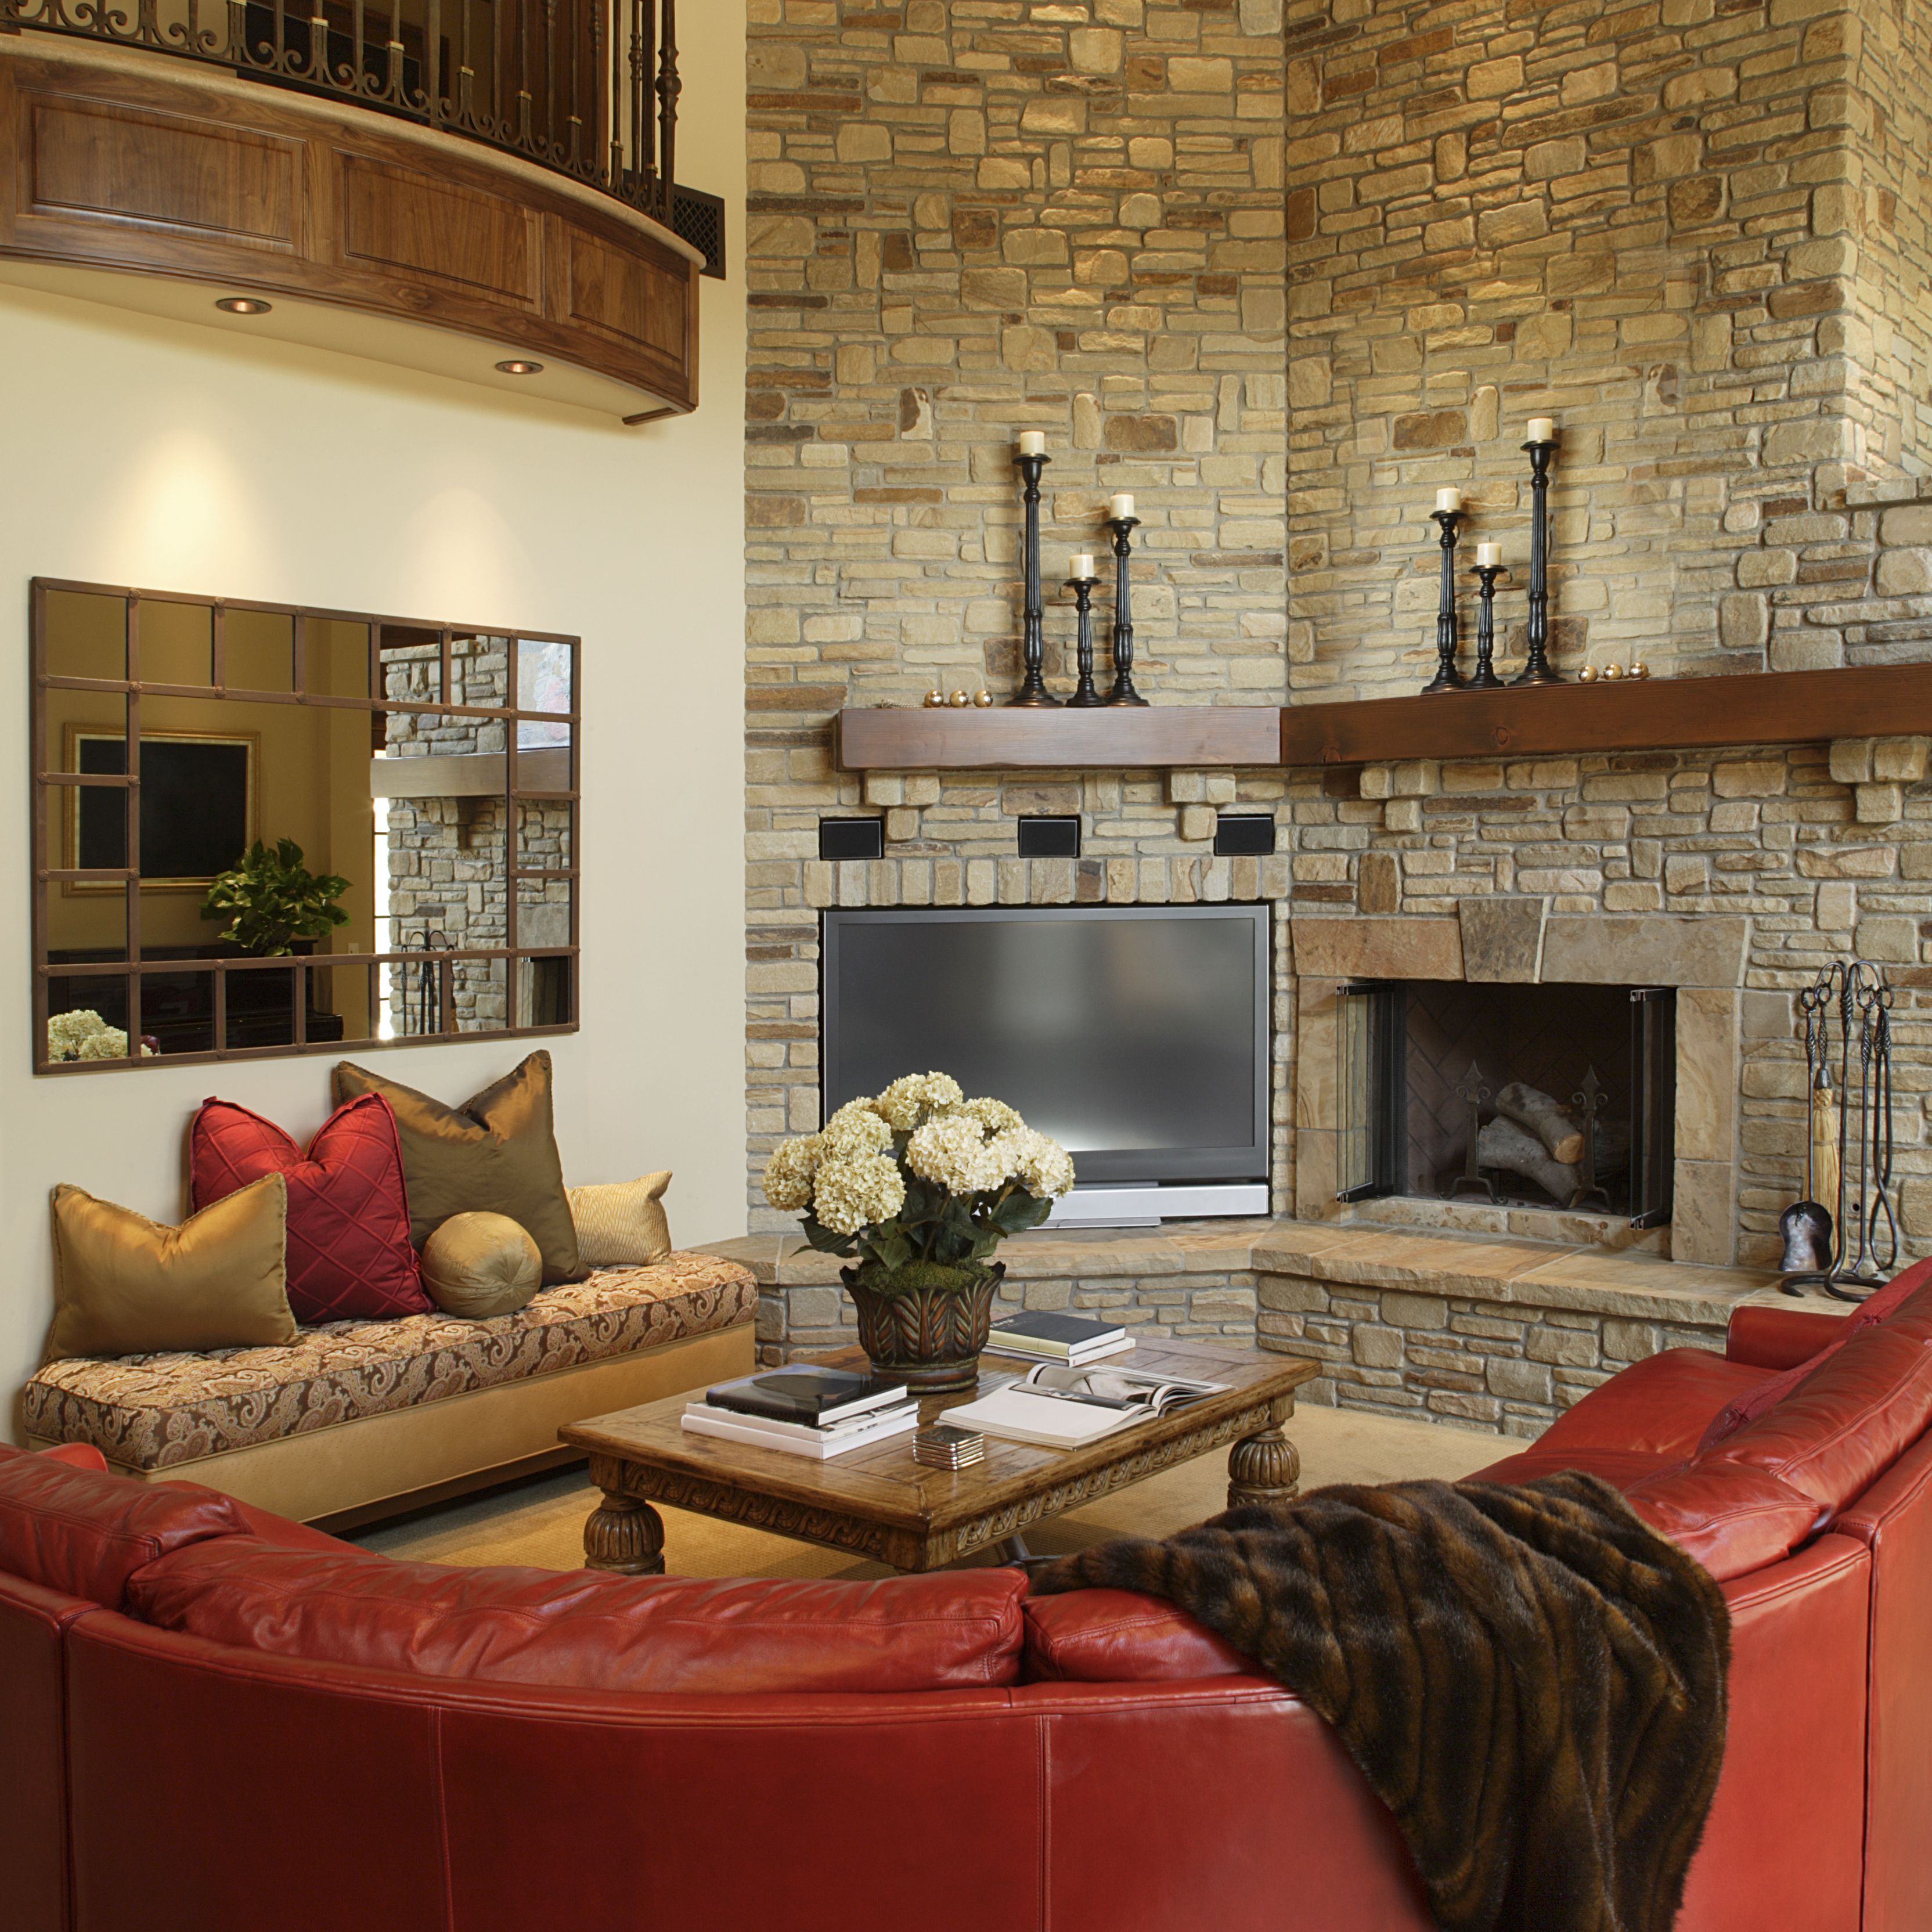 red leather sofa in living room with stone fireplace 582b f9b58d5b180b385